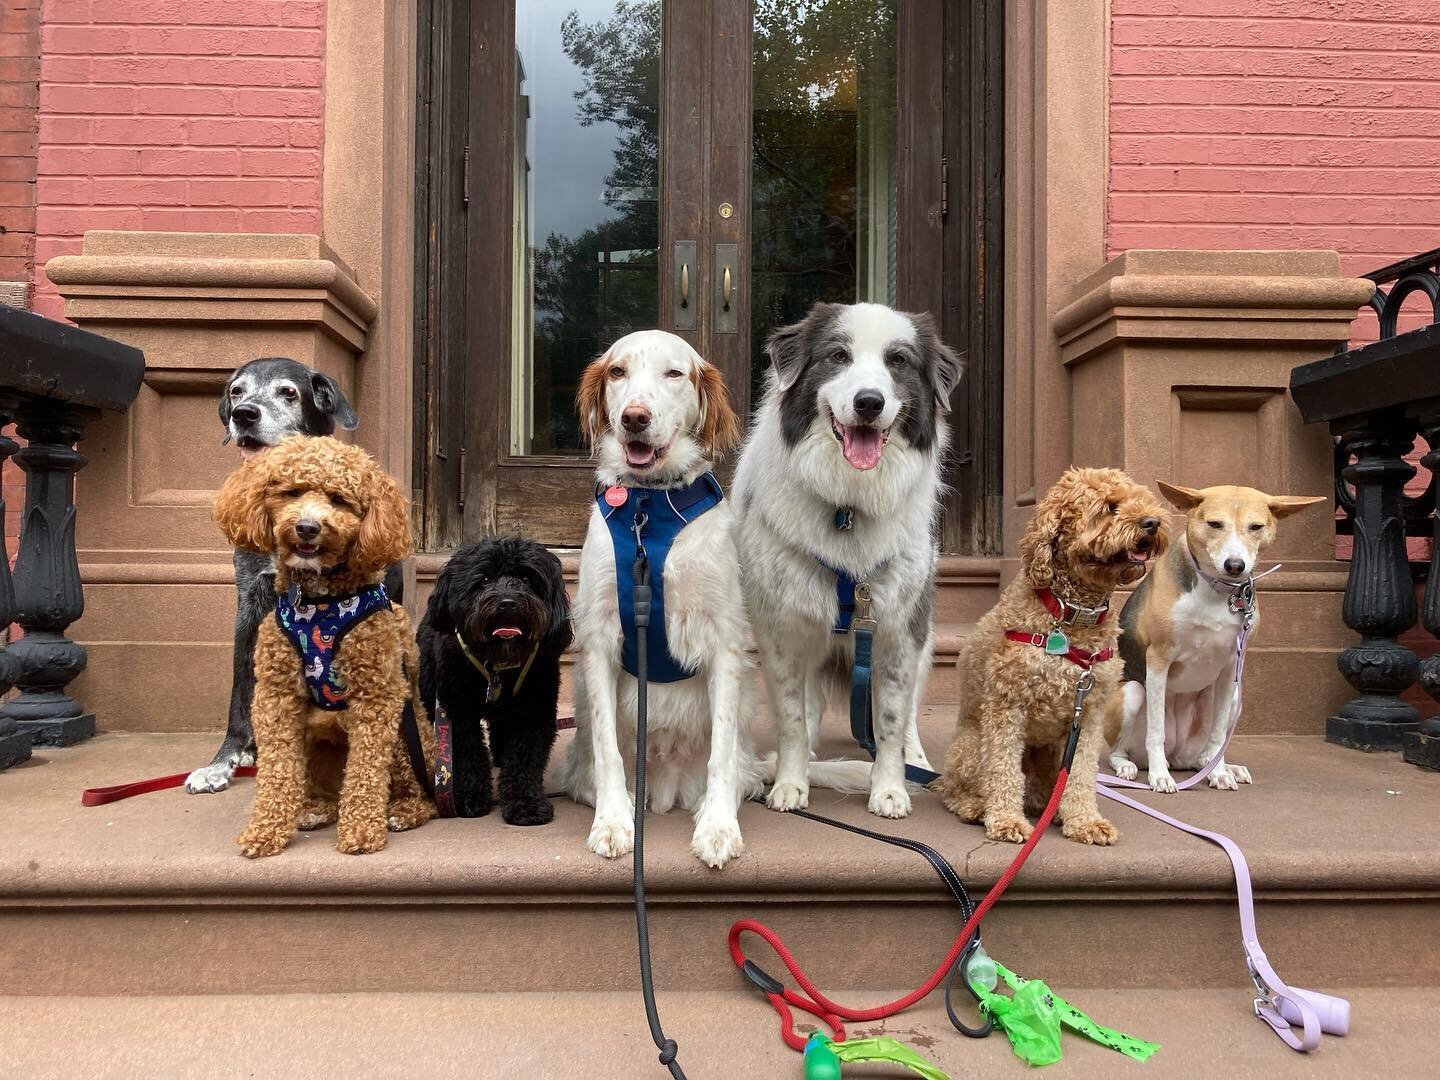 Summer by Doggie Nose Best &trade;️ featuring the best campers 🐶🐕🦮🐩🐕&zwj;🦺🐾🦴🌭 #gang #campgroup #dogs #doggienosebest #hottothetouch #dogsofnewyork #dogsofinstagram #doggie #dope #schoolisback #campers #counselors #cutedogs #womansbestfriend 